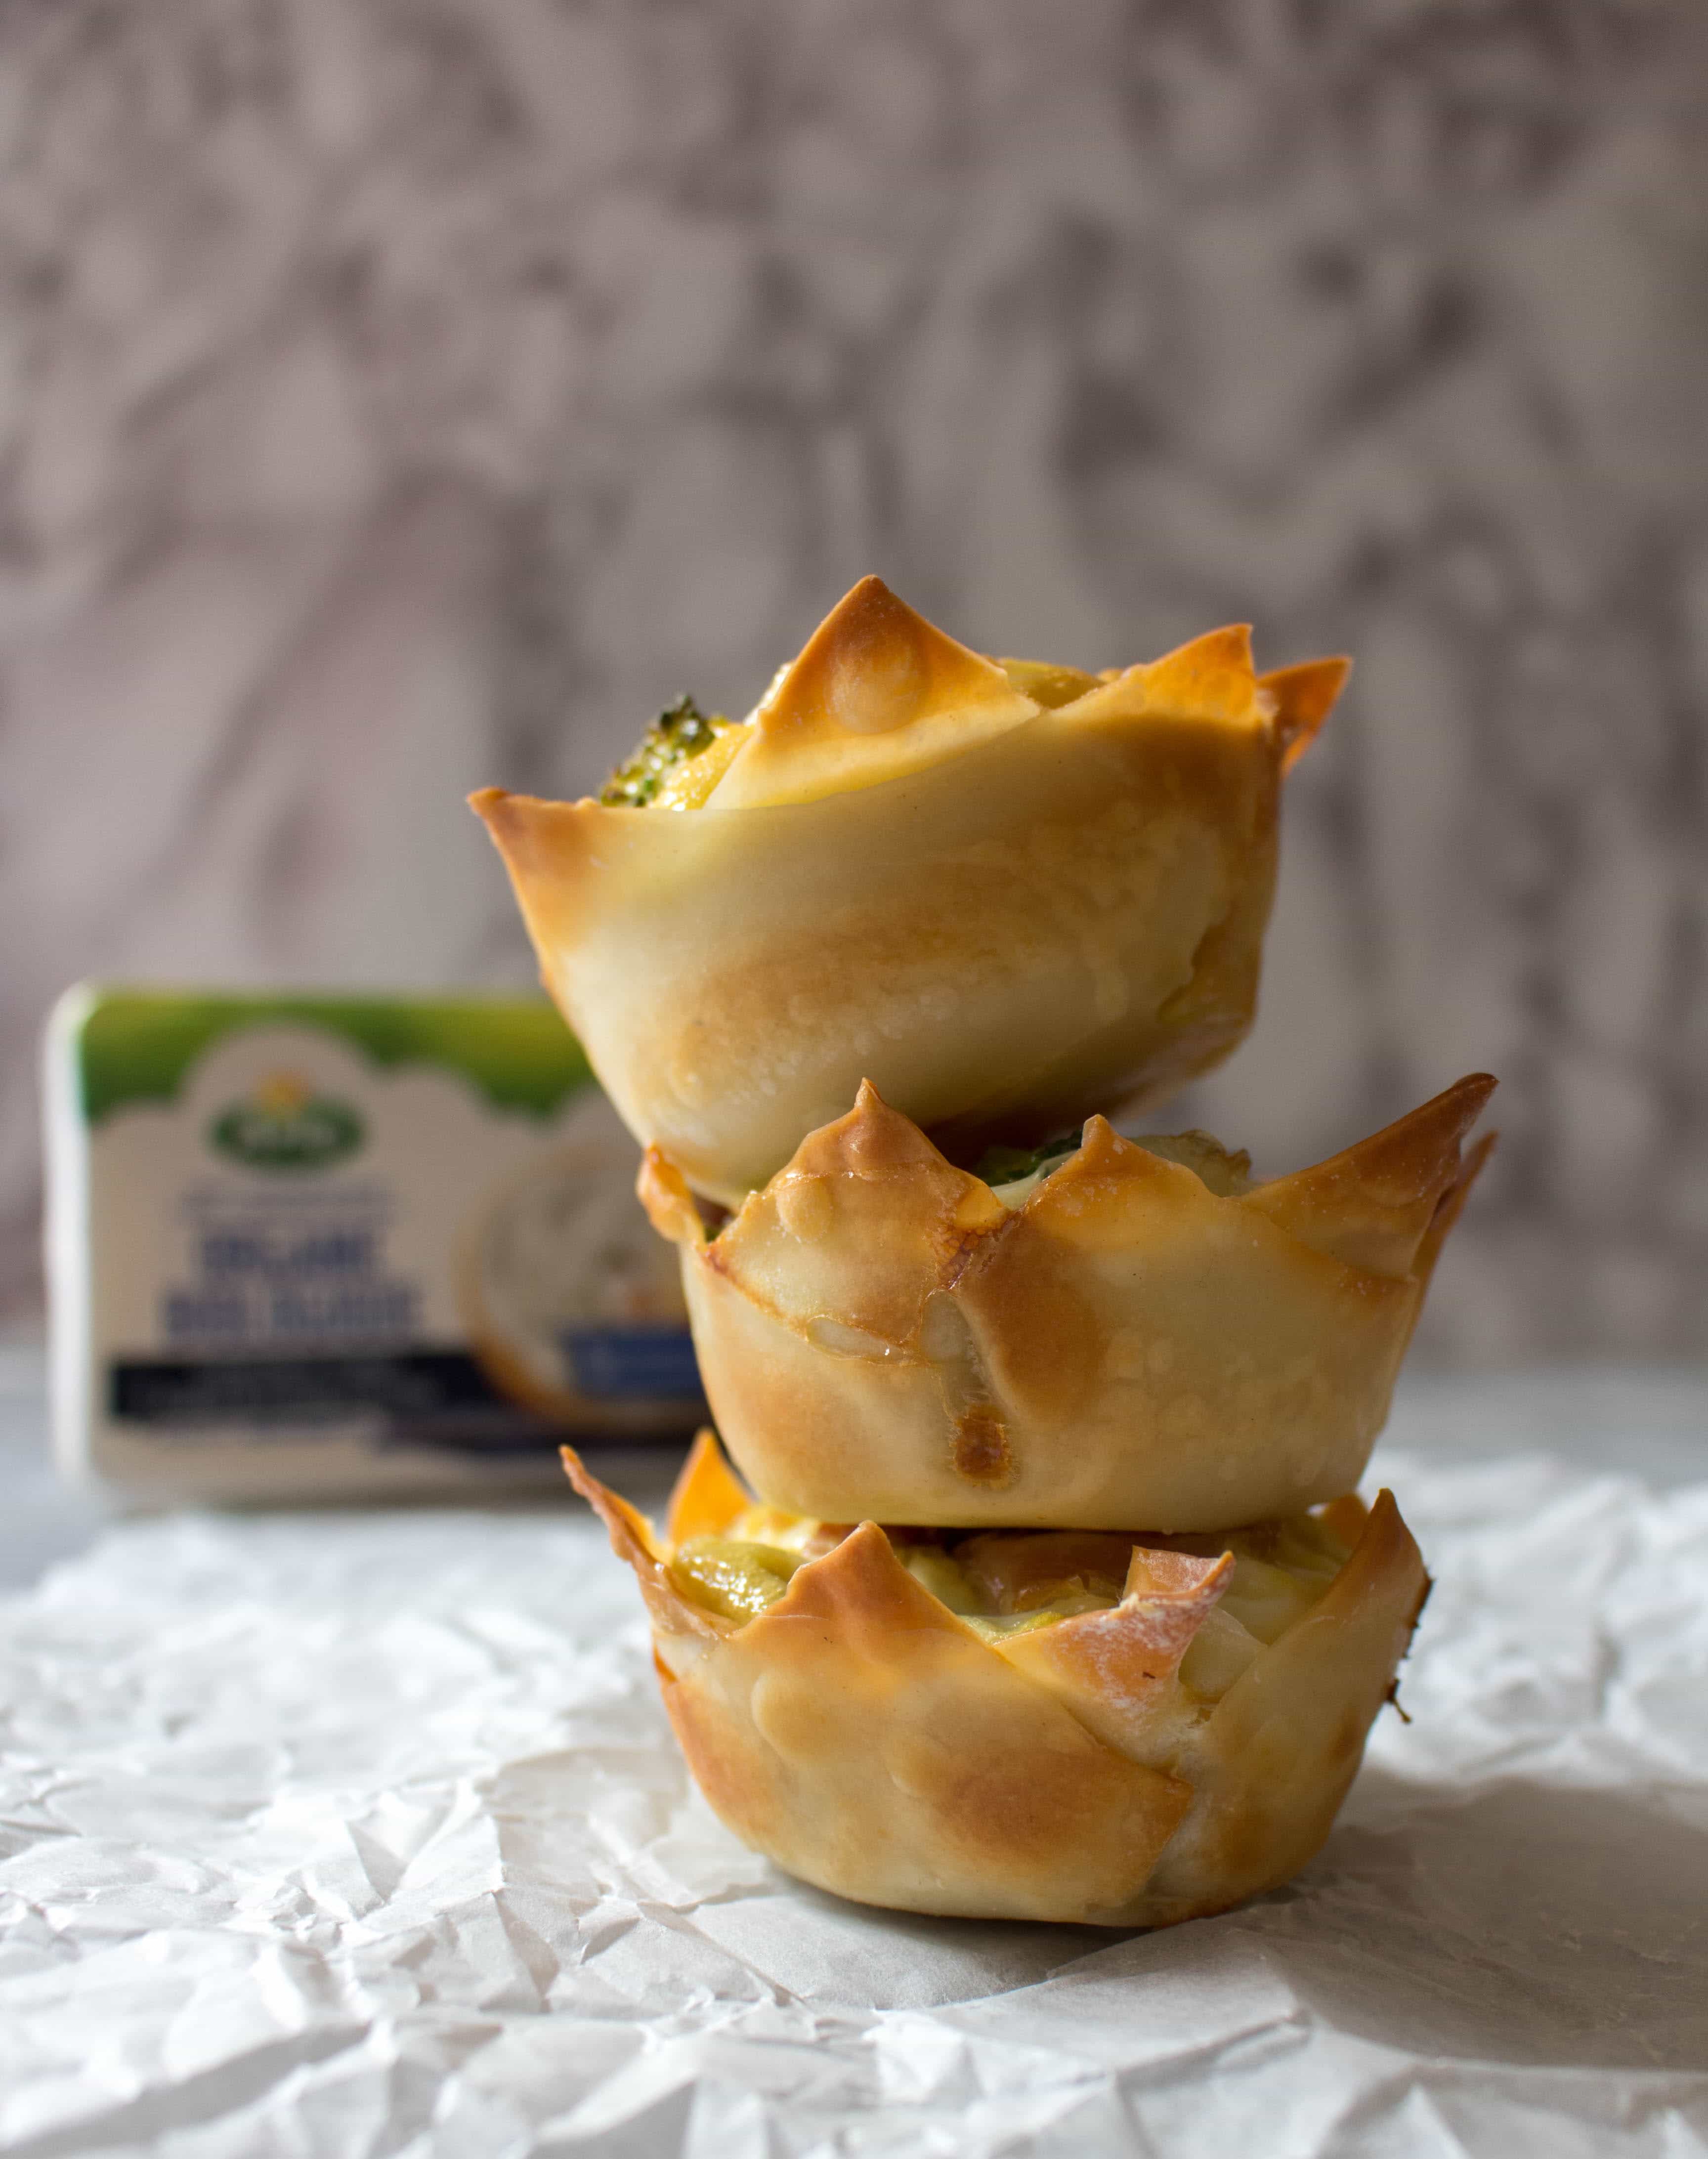 Need a breakfast meal prep idea? Why not try this delicious and fun breakfast wonton egg cups?